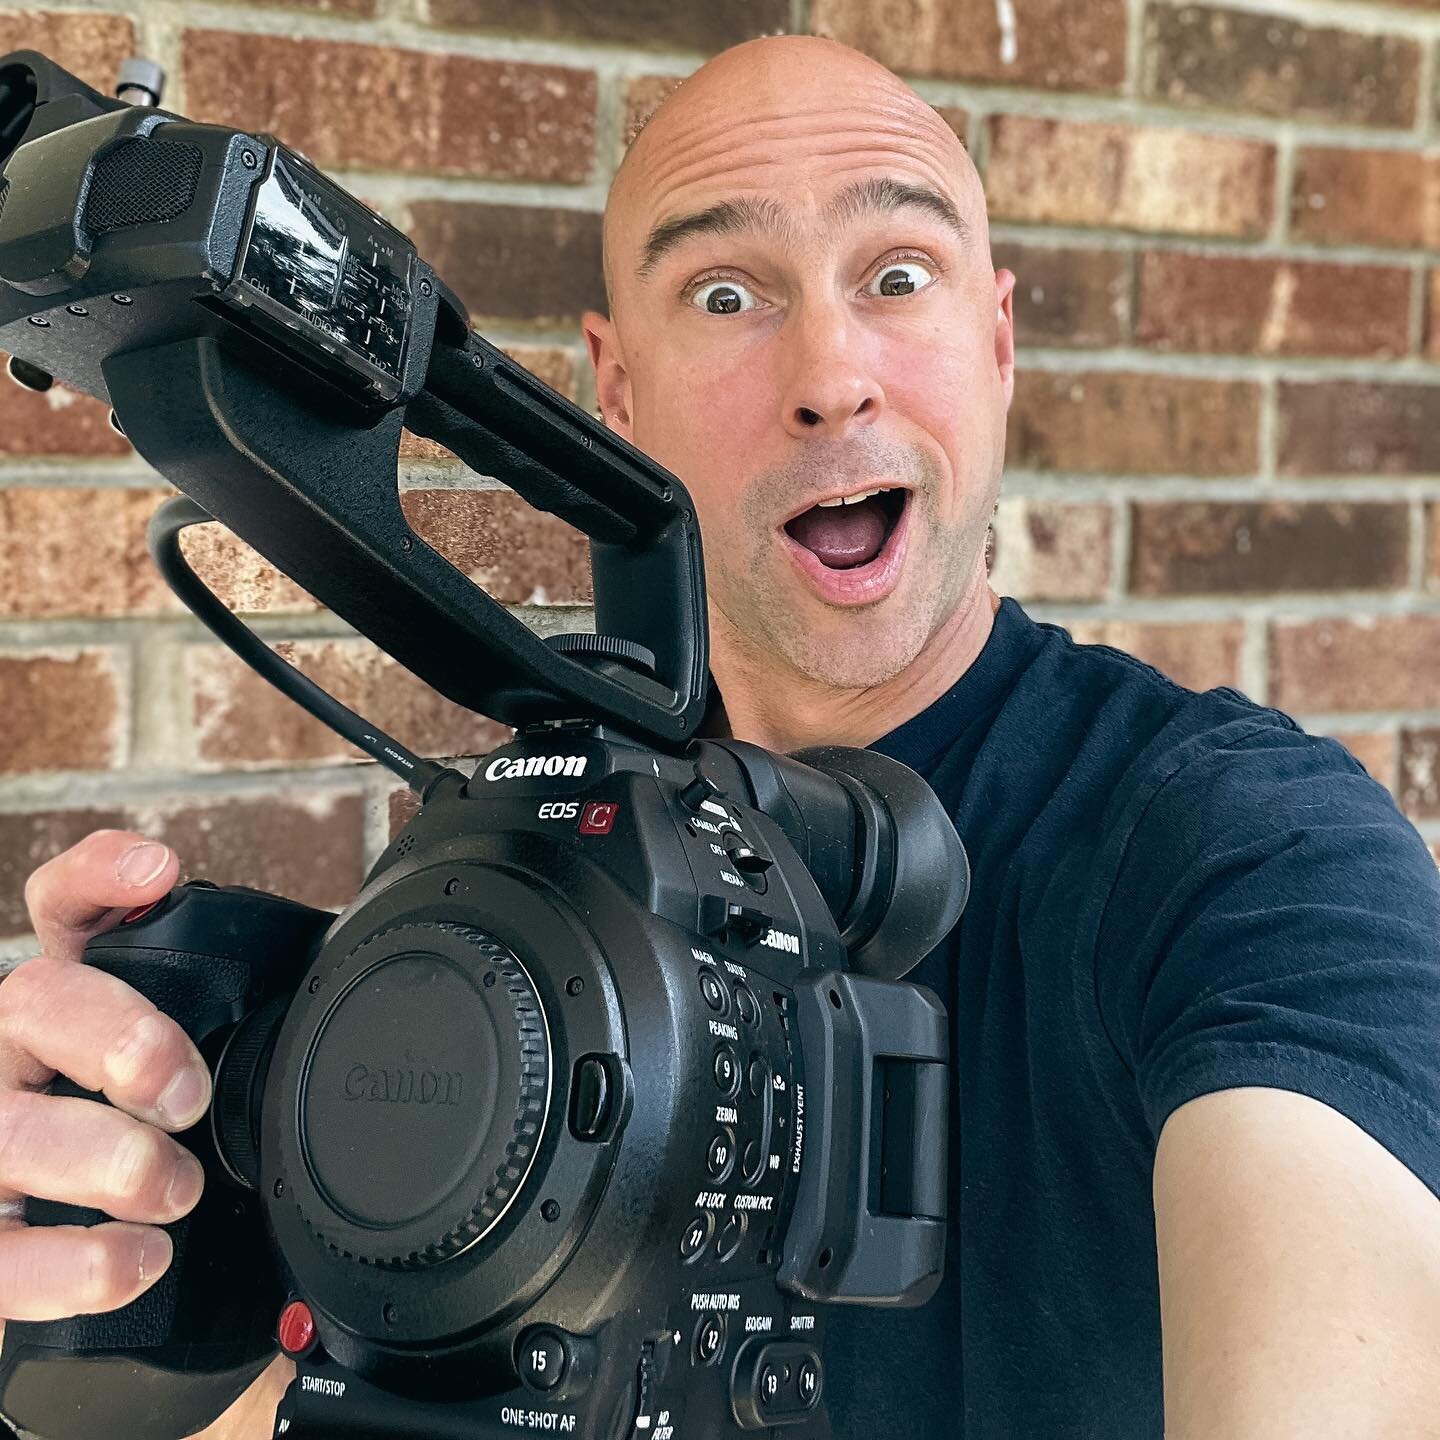 Picked up my first cinema camera - a used Canon C100 Mark II! I&rsquo;ve always done video on a DSLR but with all these YouTube videos, I thought maybe I should get a real video camera for the studio. 😜 

#canonc100mark2 #cinemacamera #youtube